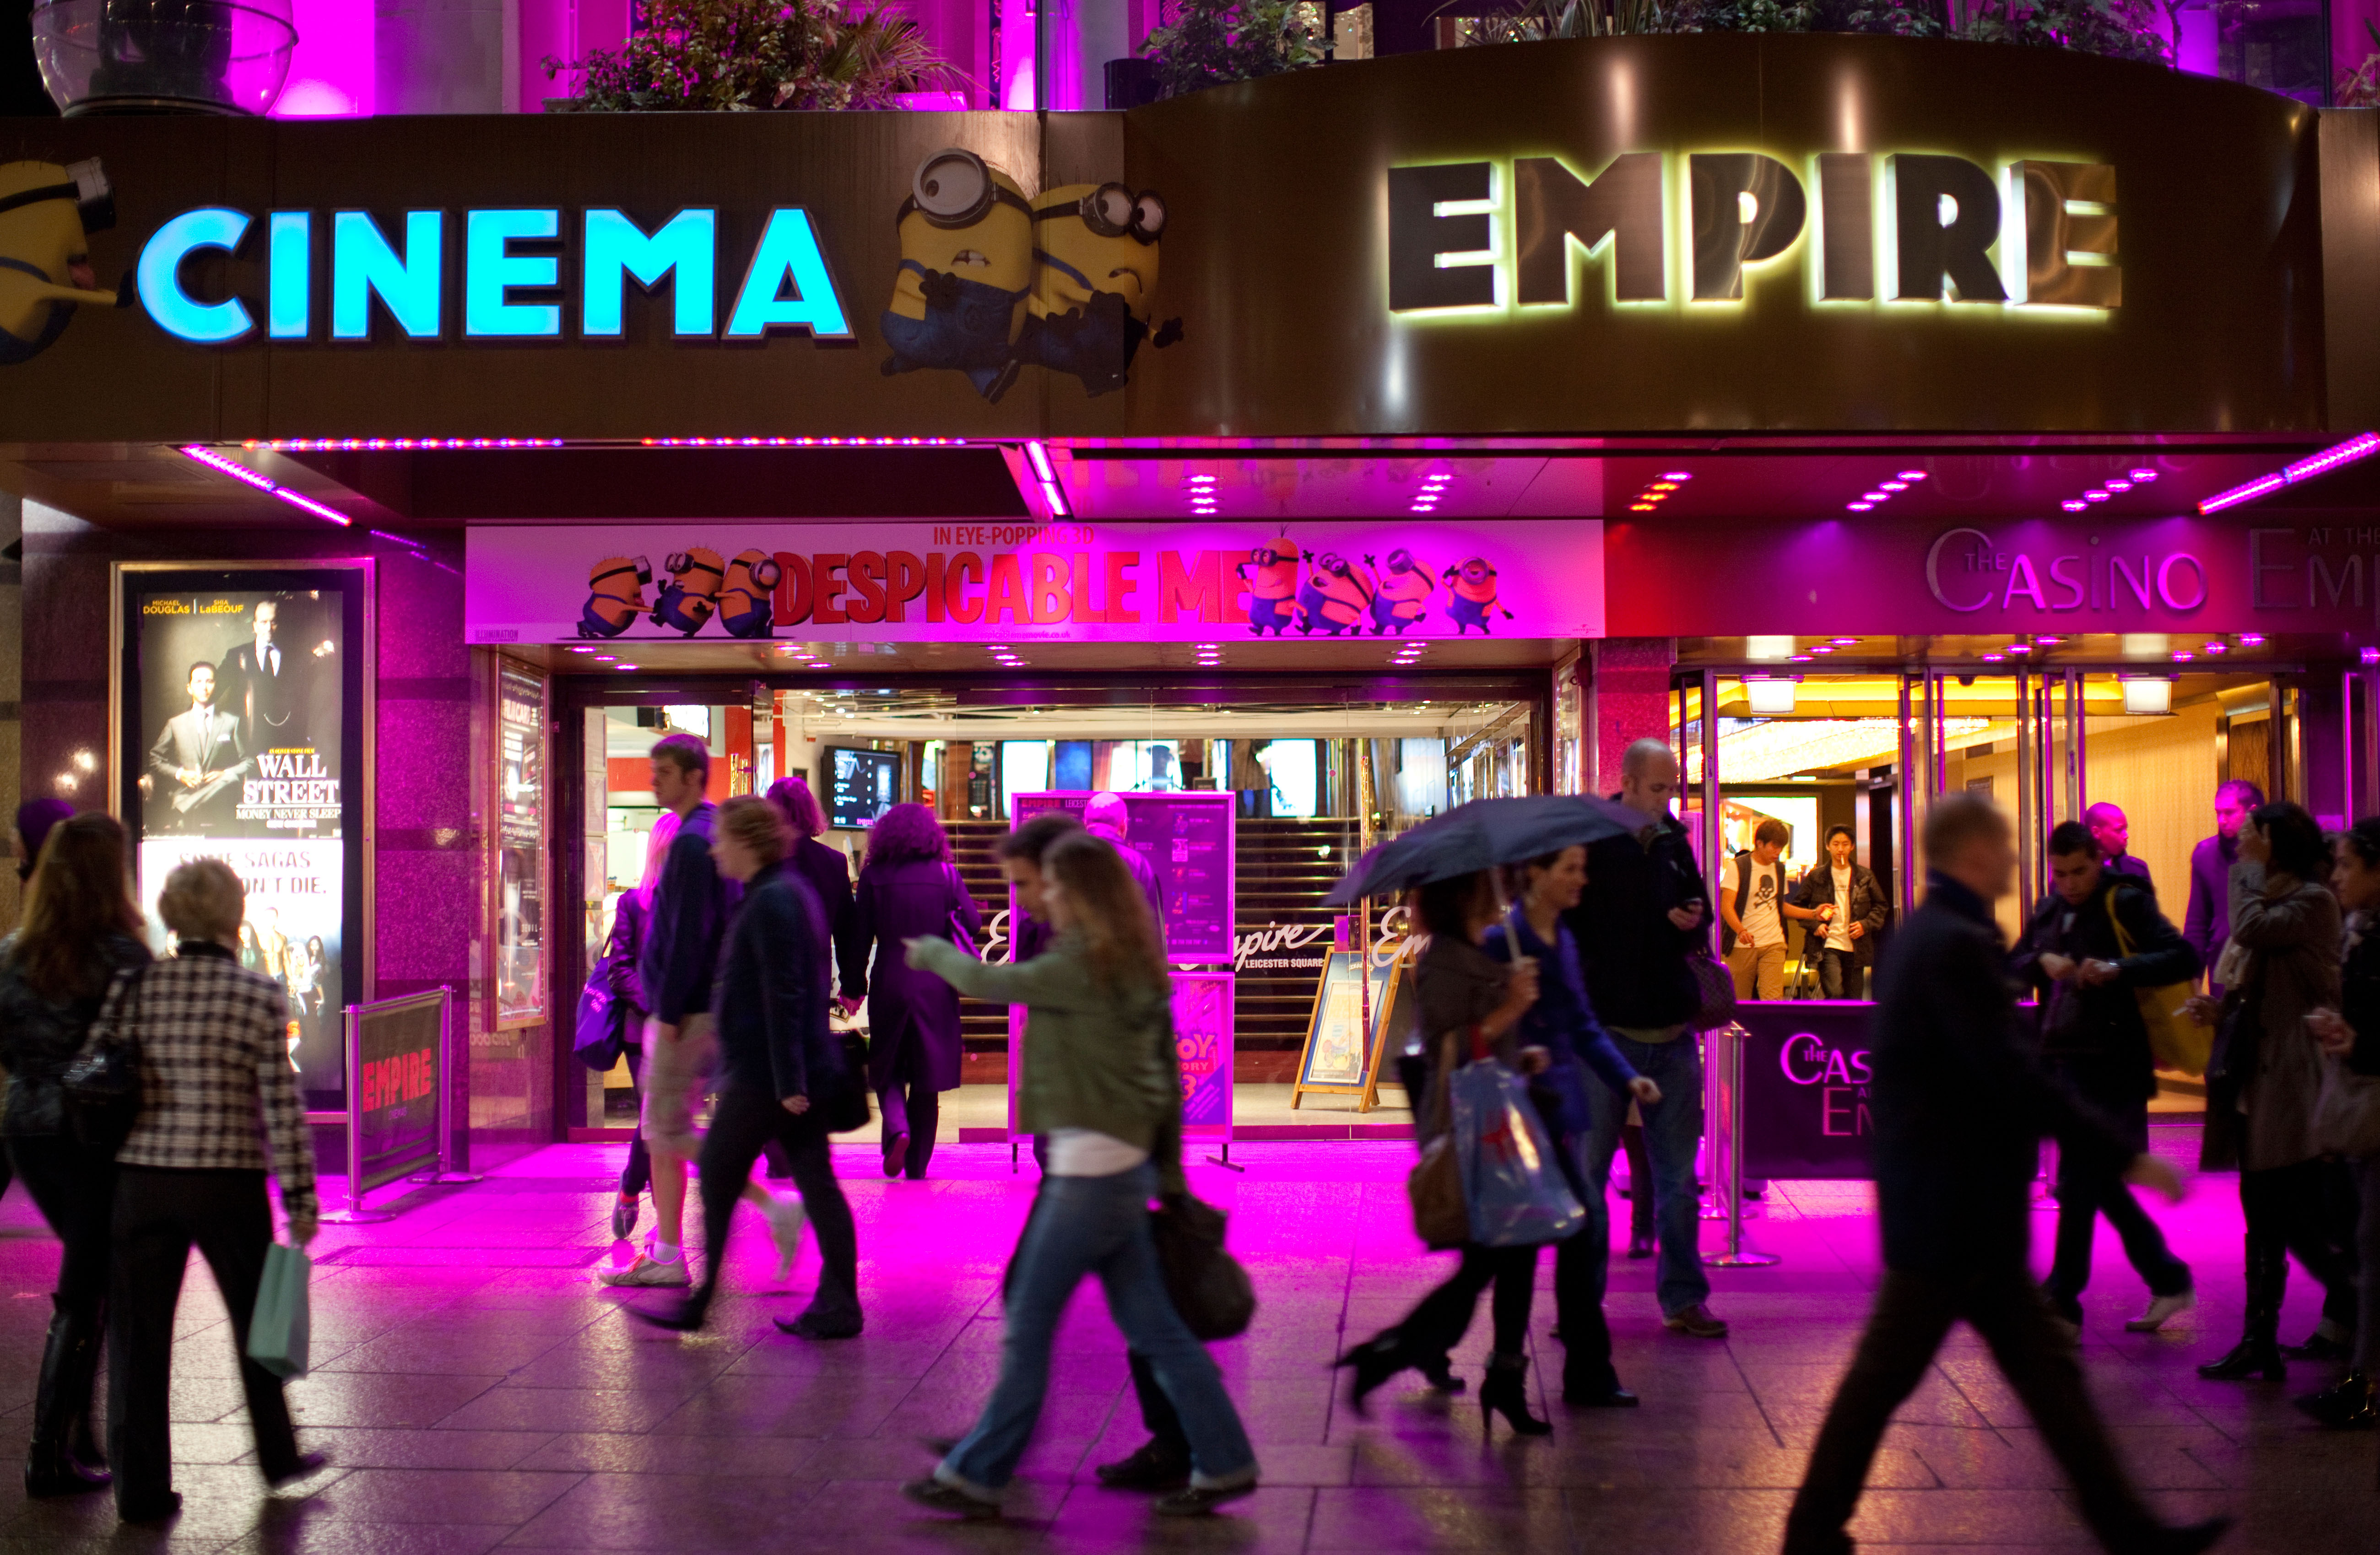 Empire Cinemas has fallen into administration, resulting in the instant closure of six cinemas as well as 150 redundancies